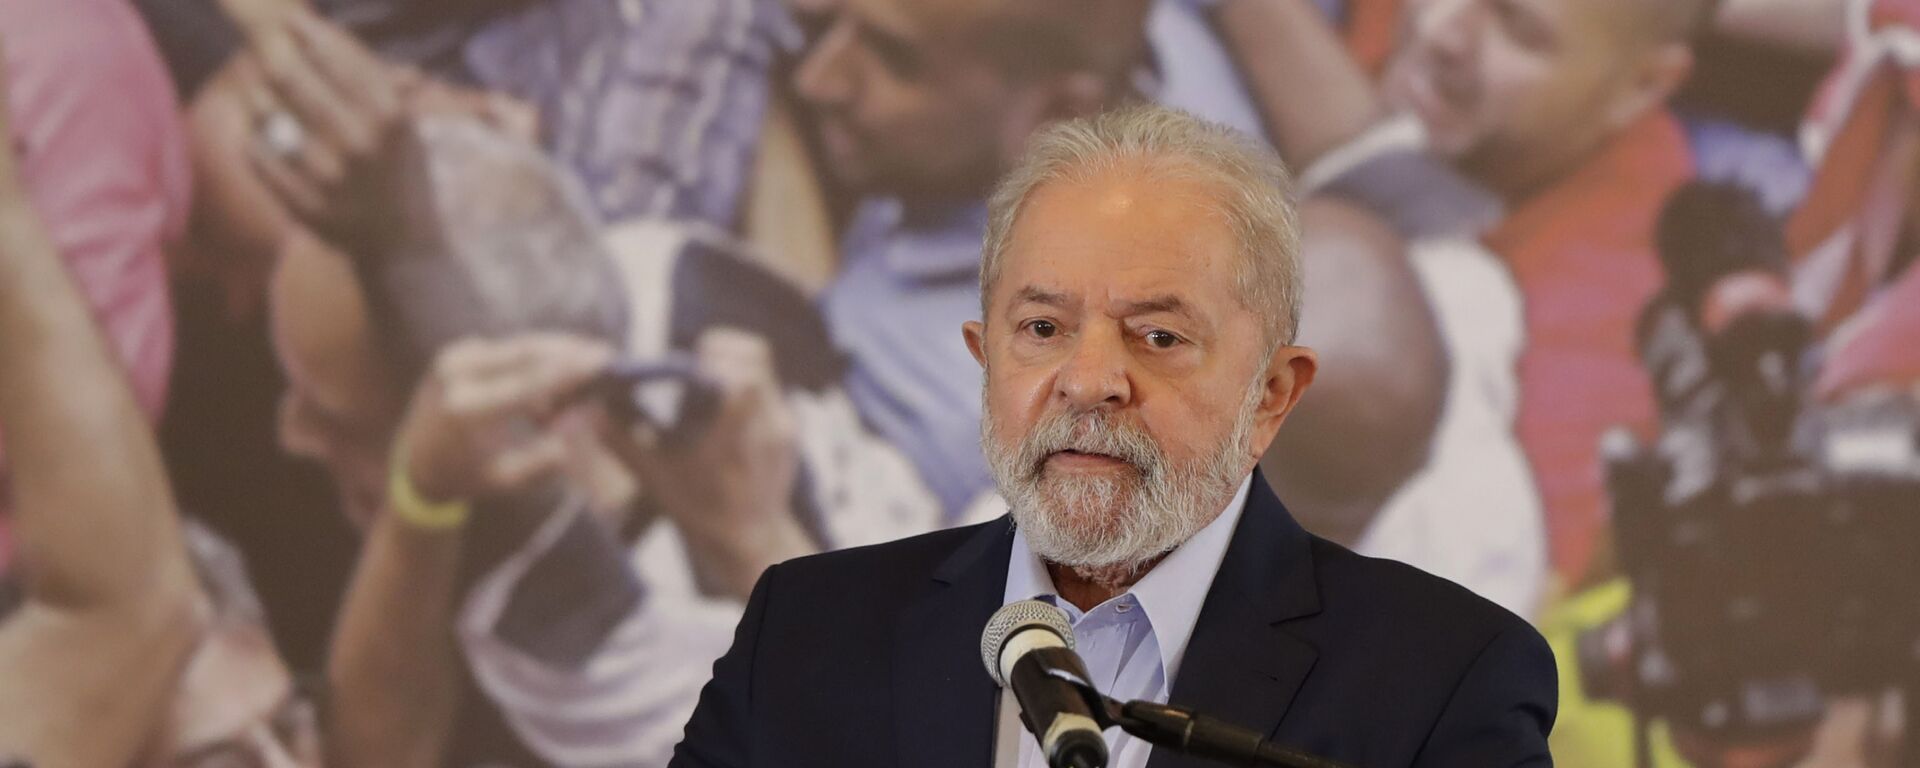 In this March 10, 2021, file photo, former Brazilian President Luiz Inacio Lula da Silva speaks at the Metalworkers Union headquarters in Sao Bernardo do Campo, Sao Paulo state, Brazil, after a judge threw out both of his corruption convictions. - Sputnik International, 1920, 11.06.2023